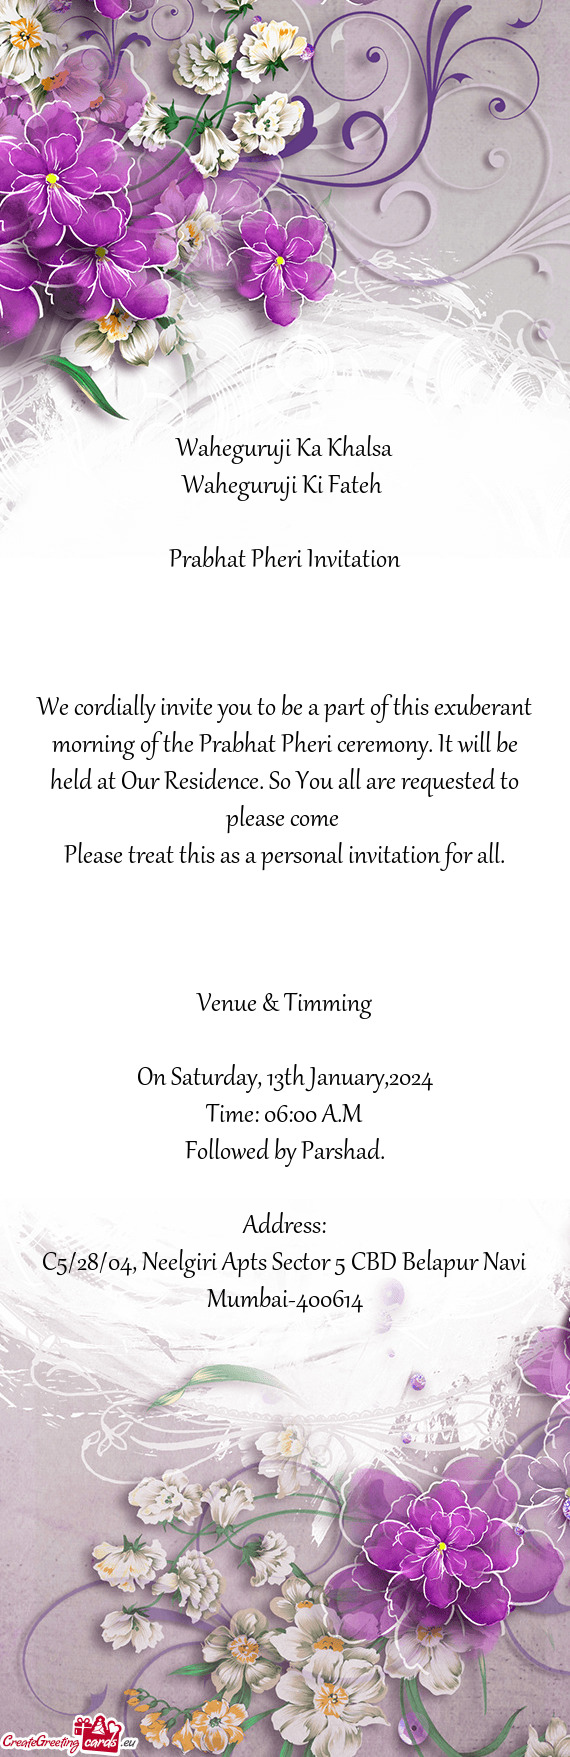 L be held at Our Residence. So You all are requested to please come